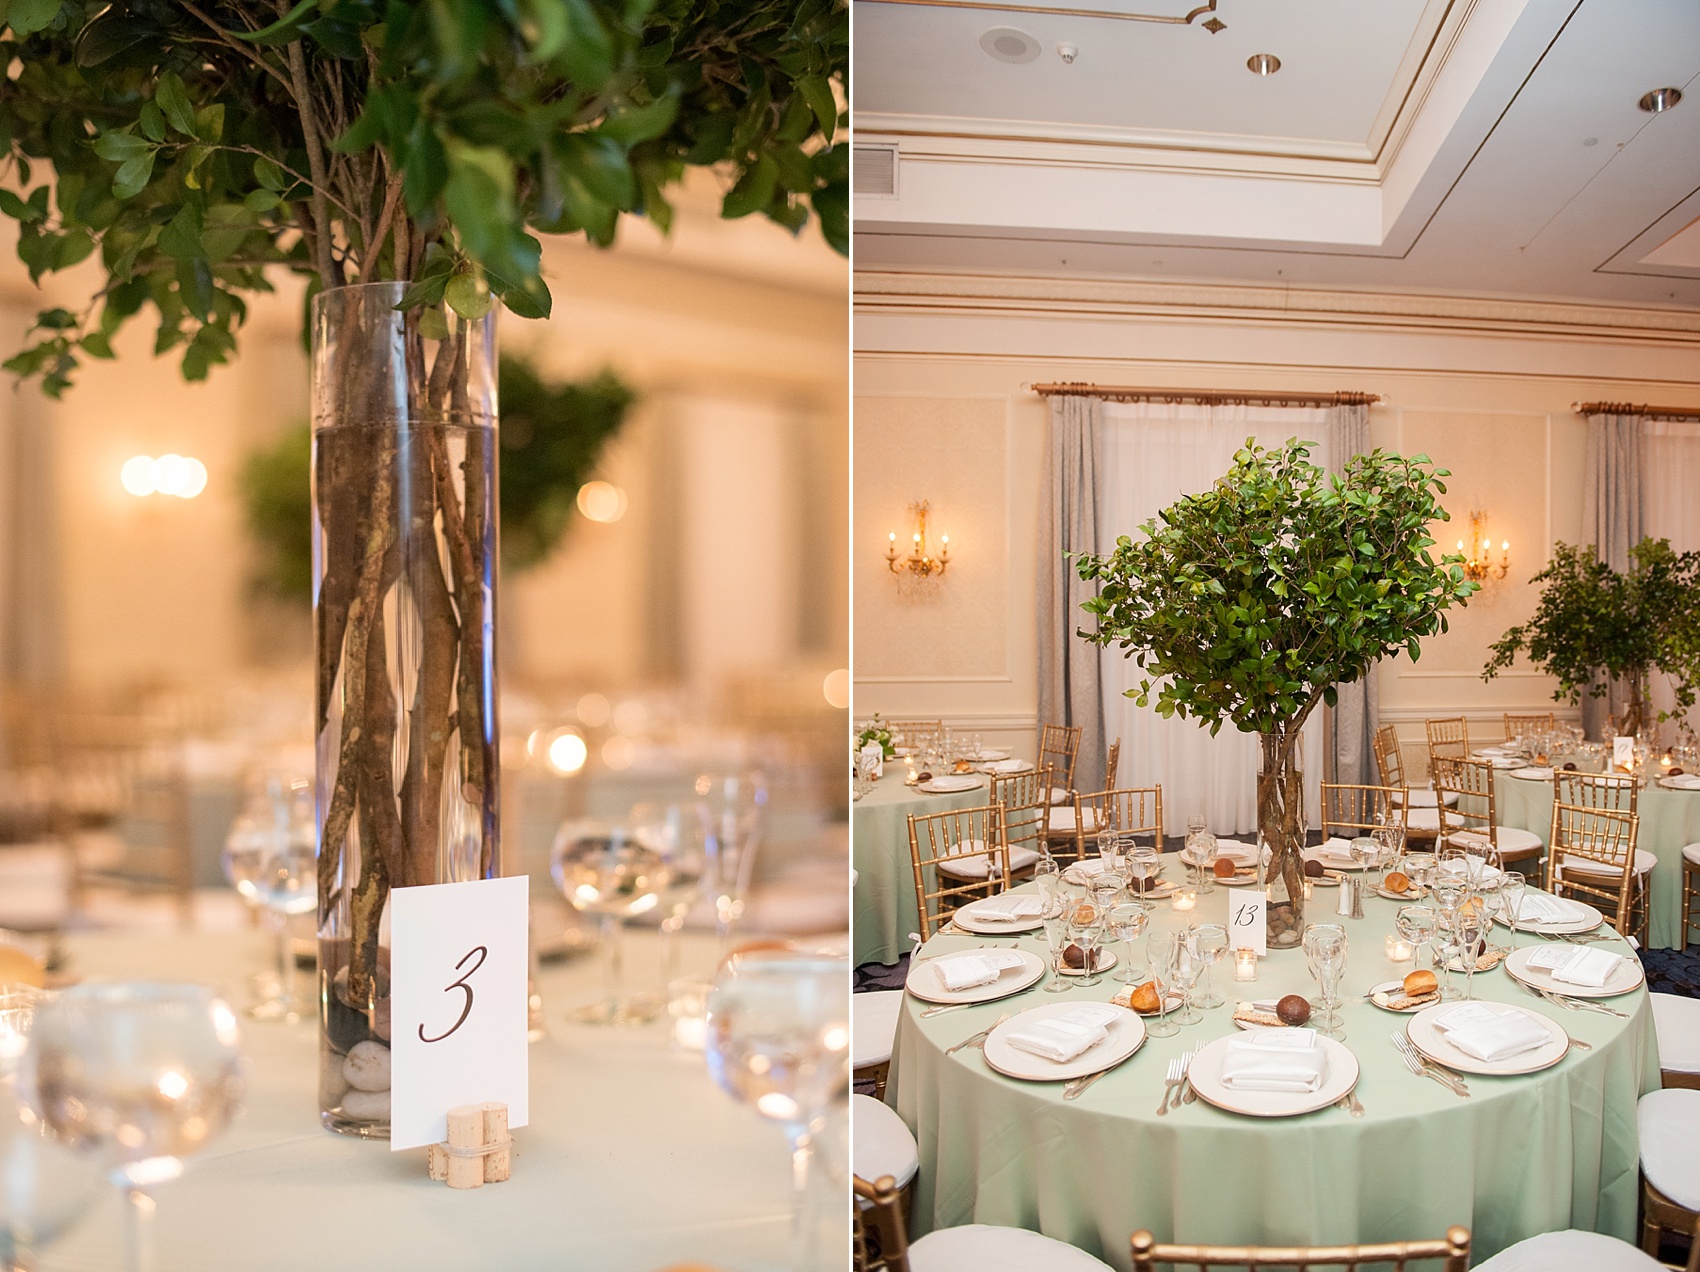 Pearl River Hilton wedding party photos with tree centerpieces. Images by Mikkel Paige Photography, NYC wedding photographer.